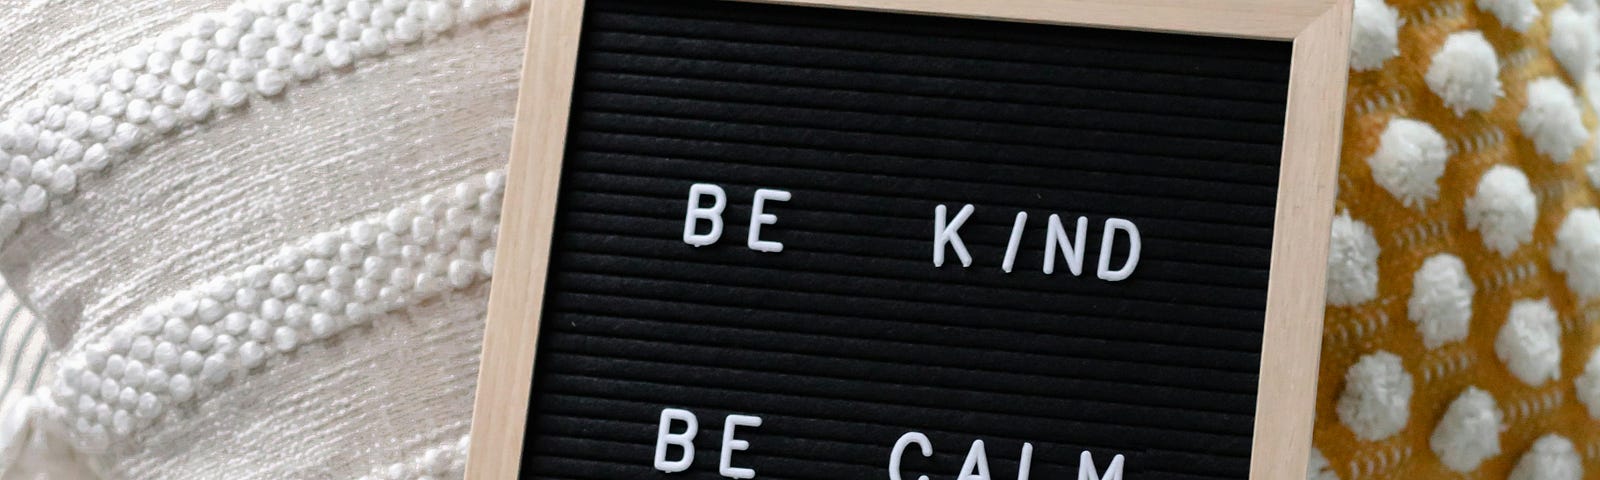 Board that says BE KIND BE CALM BE SAFE #SPREADJOY leaning against cream-colored and yellow pillows.